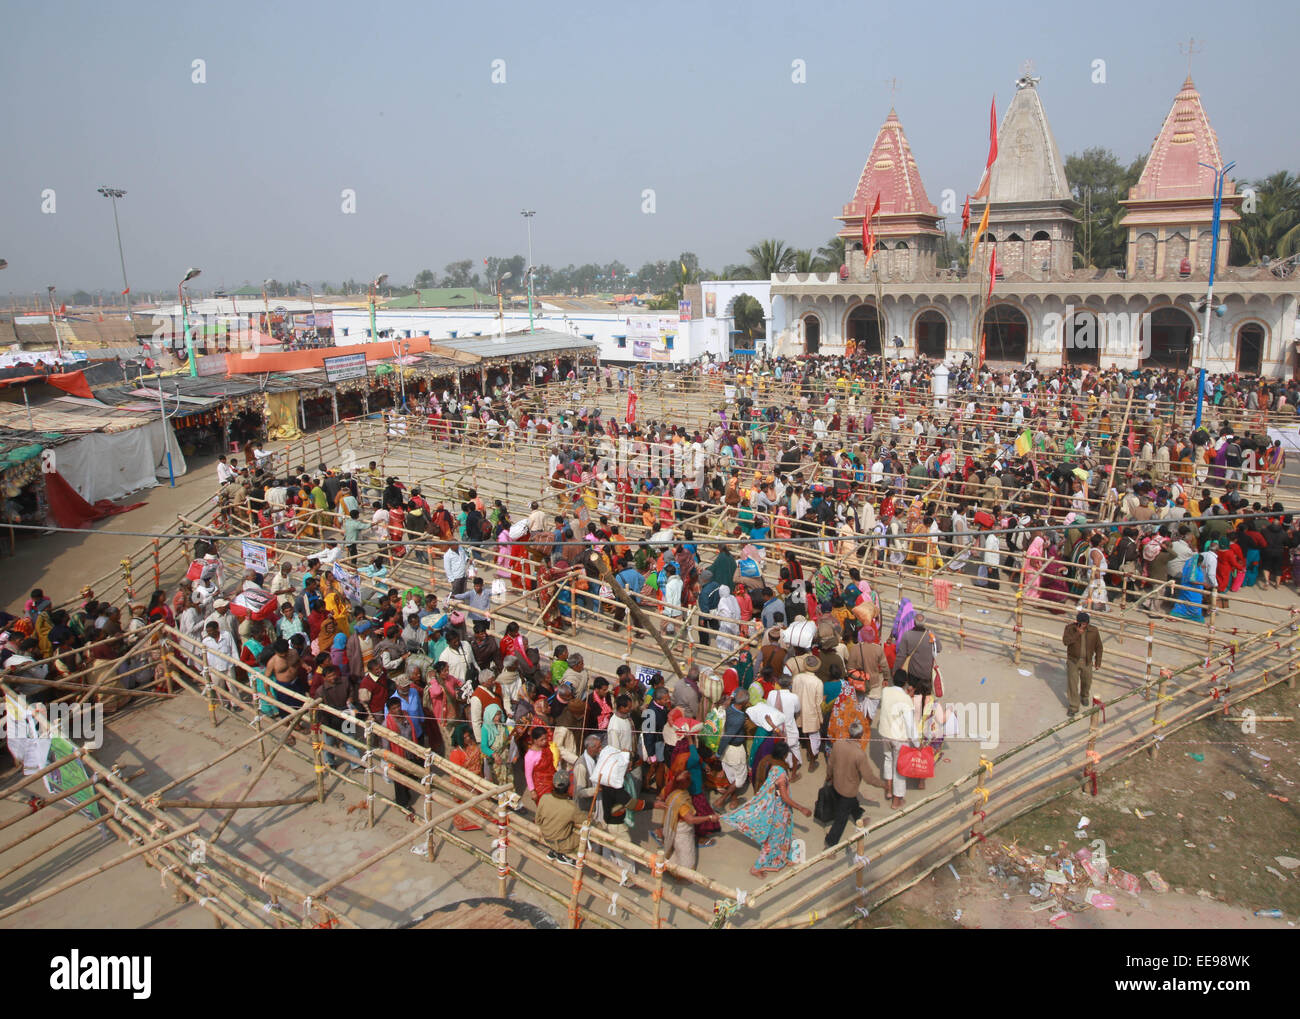 Hindu pilgrims gather infront of Kapilmuni Temple at Gangasagar island, around 160 kms south of Kolkata. Sadhus and Hindu pilgrims from all over the country come for the annual Hindu holy festival Gangasagar Mela, to take a 'holy dip' in the ocean at the confluence of the River Ganges and the Bay of Bengal on the occasion of Makar Sankranti, a holy day of the Hindu calendar considered to be of great religious significance in Hindu mythology. © Bhaskar Mallick/Pacific Press/Alamy Live News Stock Photo